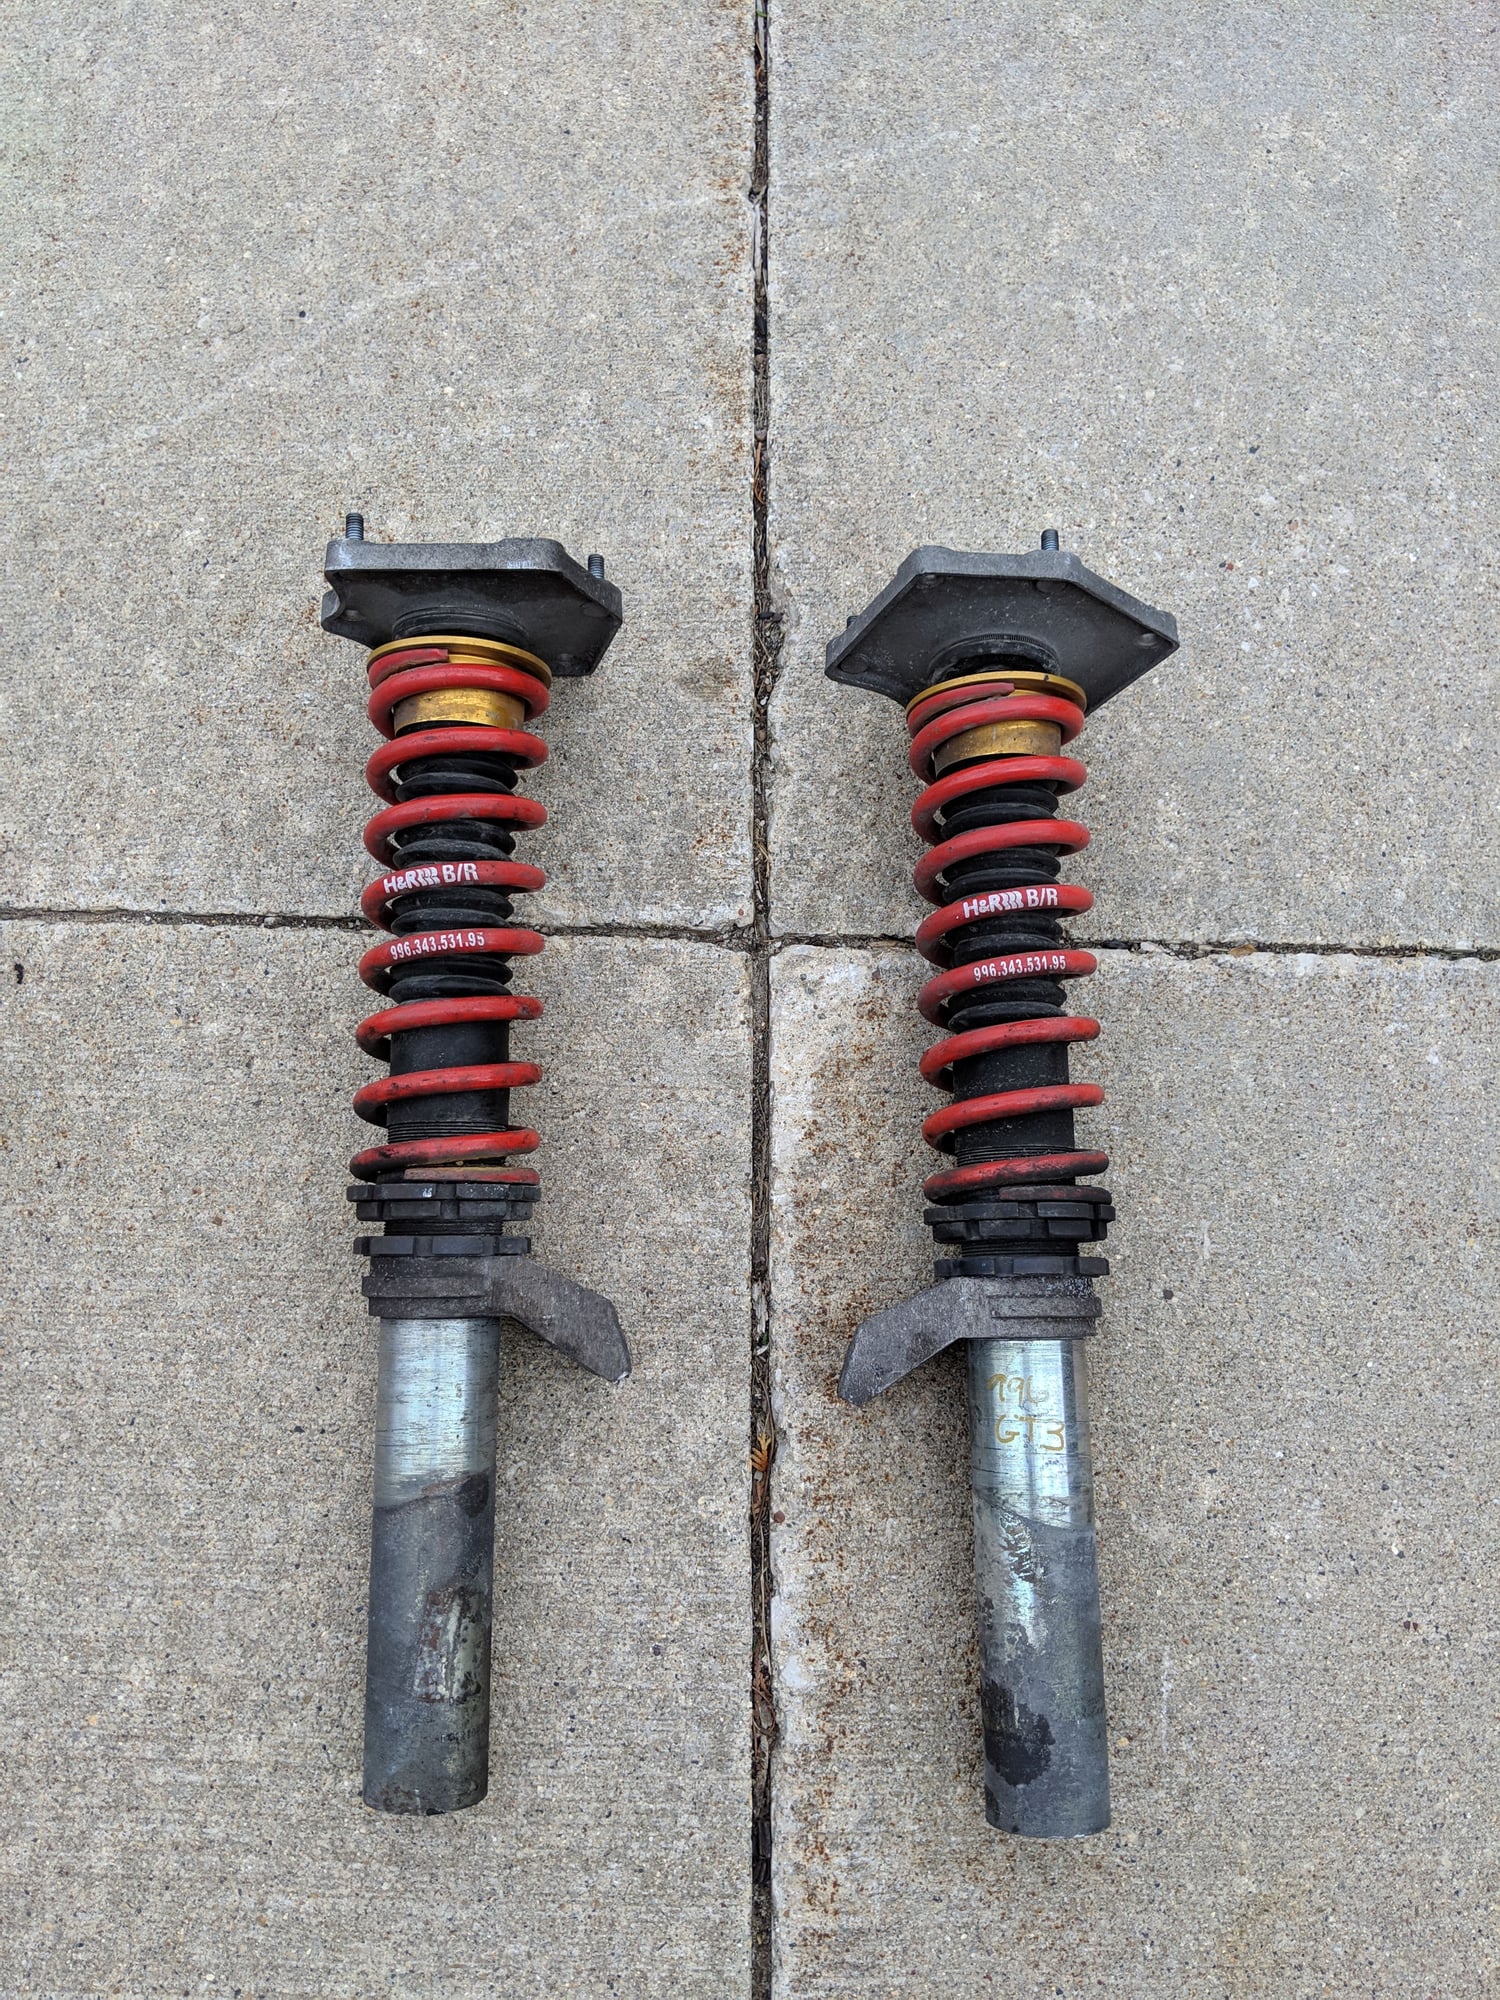 Steering/Suspension - FS: OEM 996 GT3 Coilovers Including Front Hats - Used - 1999 to 2005 Porsche 911 - Waukesha, WI 53188, United States